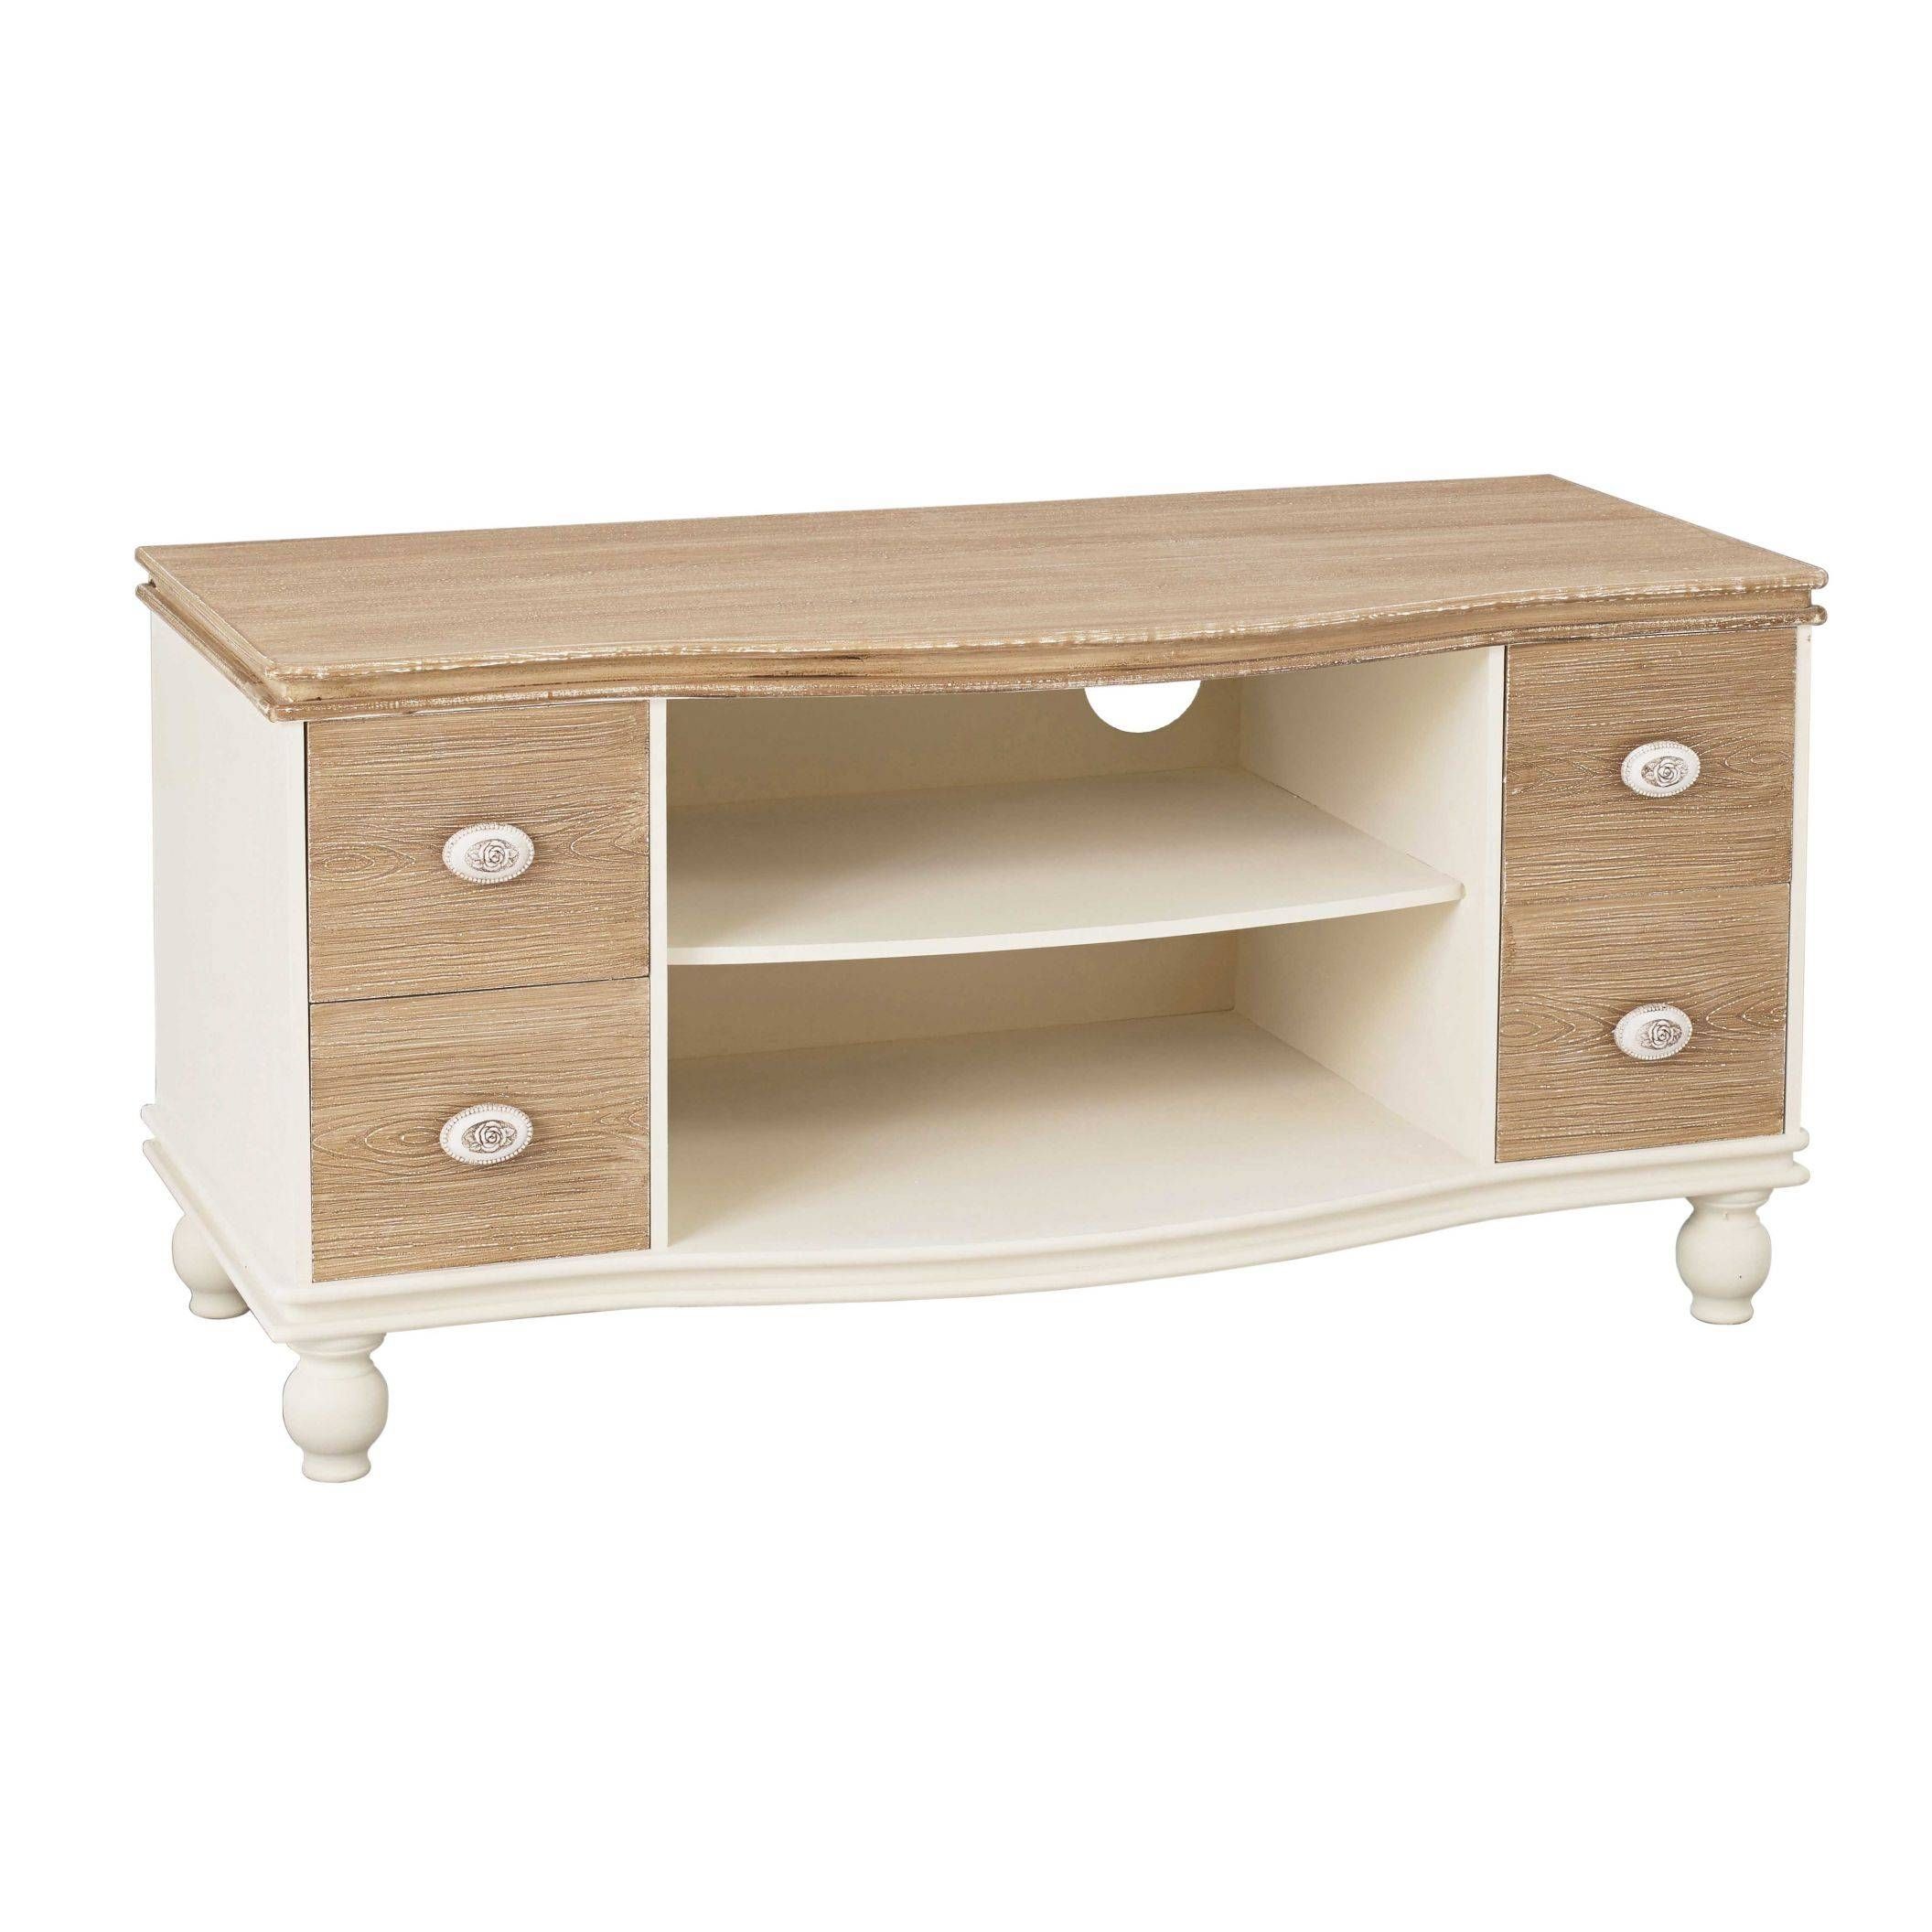 Juliette Shabby Chic Tv Unit | French Style Furniture With French Style Tv Cabinets (View 12 of 15)